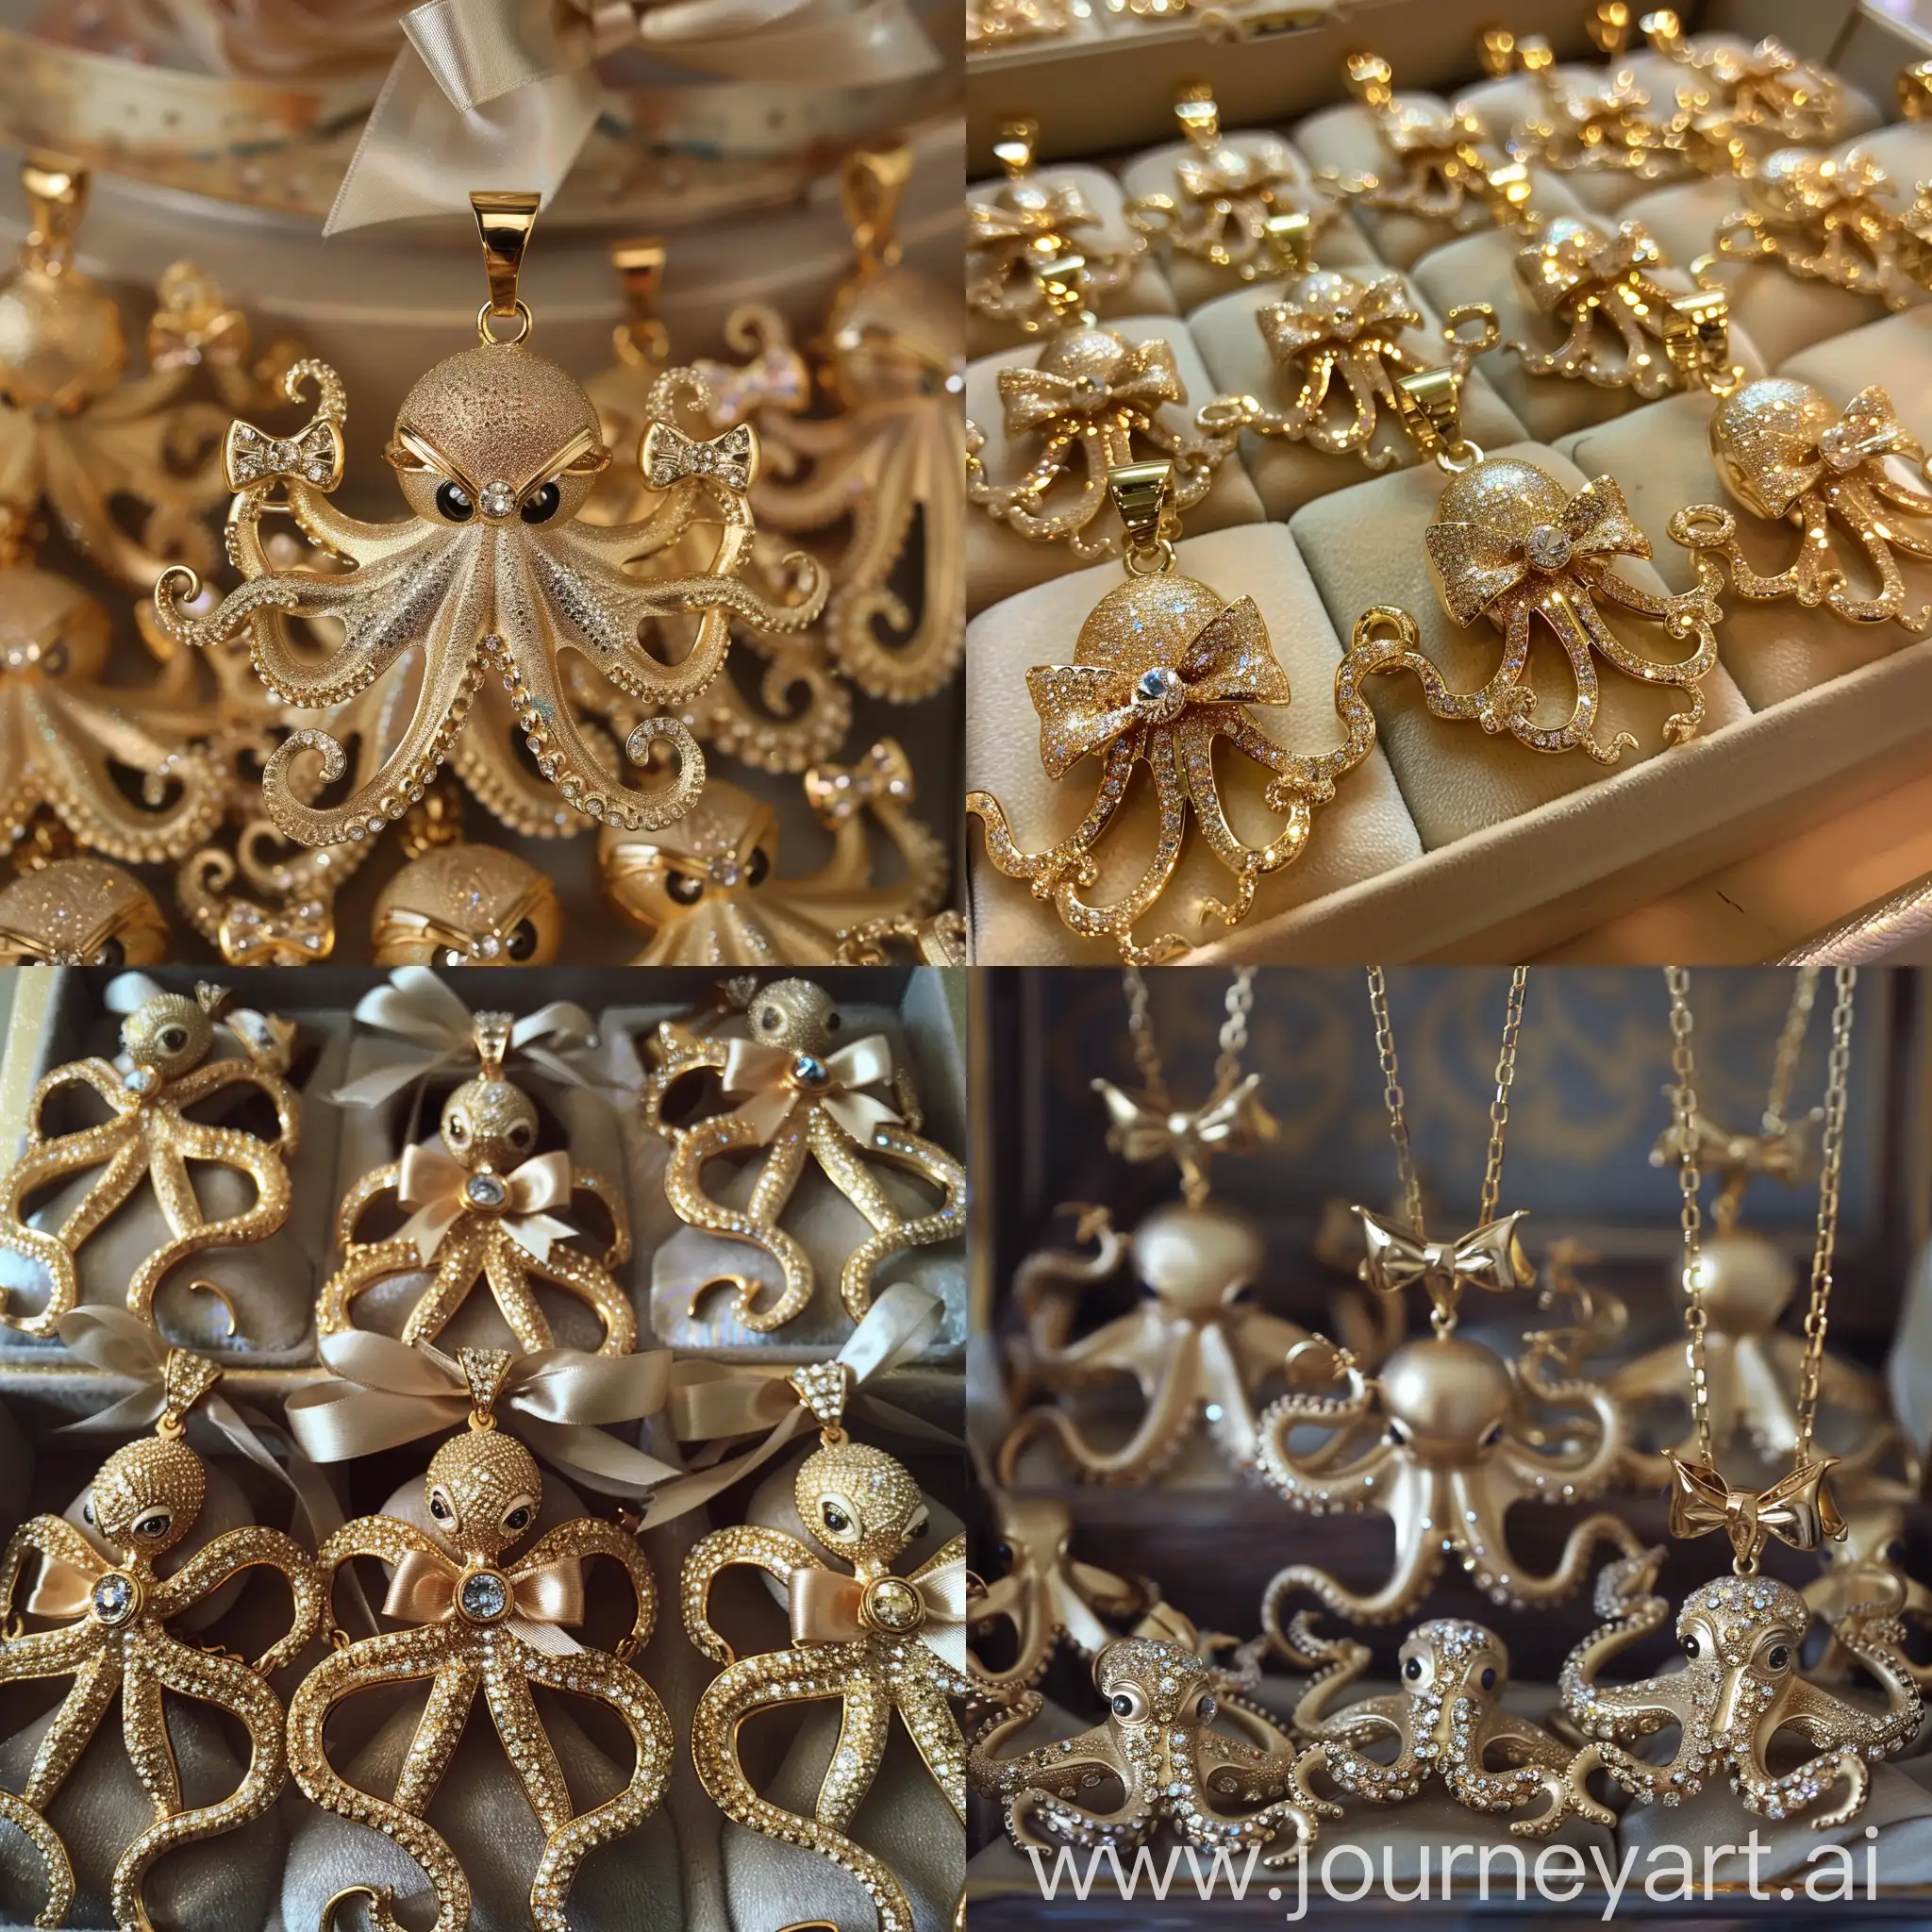 10 gold pendants that are not the same, and each one is in the shape of a three-dimensional octopus, and jewels are worked on their arms, and they have bows on their heads, with very fancy and beautiful eyelashes and eyes. Inside the jewelry boxes with sea and ocean theme